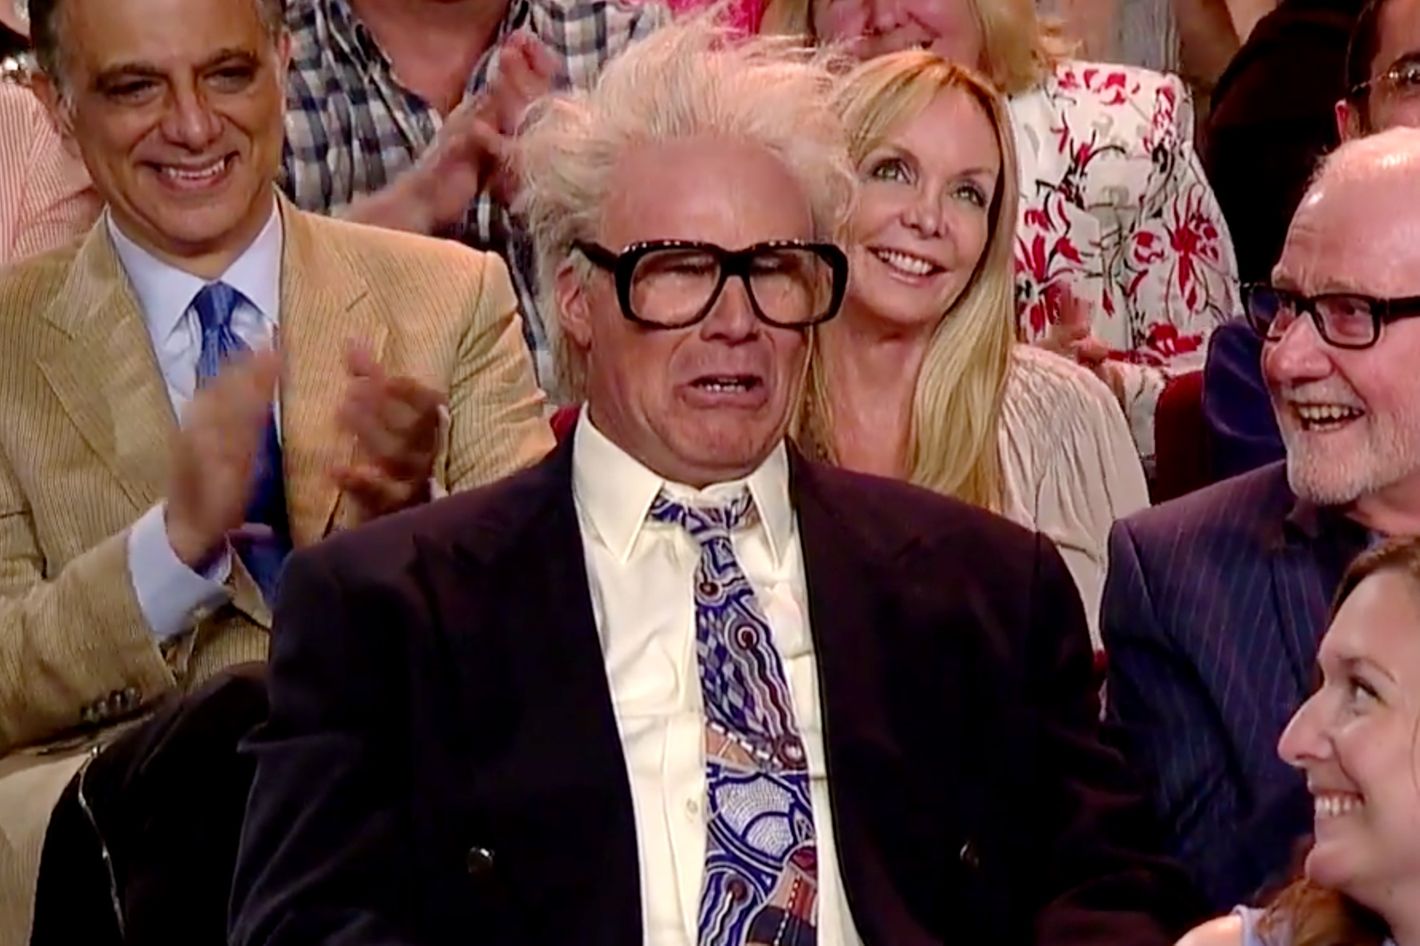 Will Ferrell spoofs Harry Caray on 'Letterman